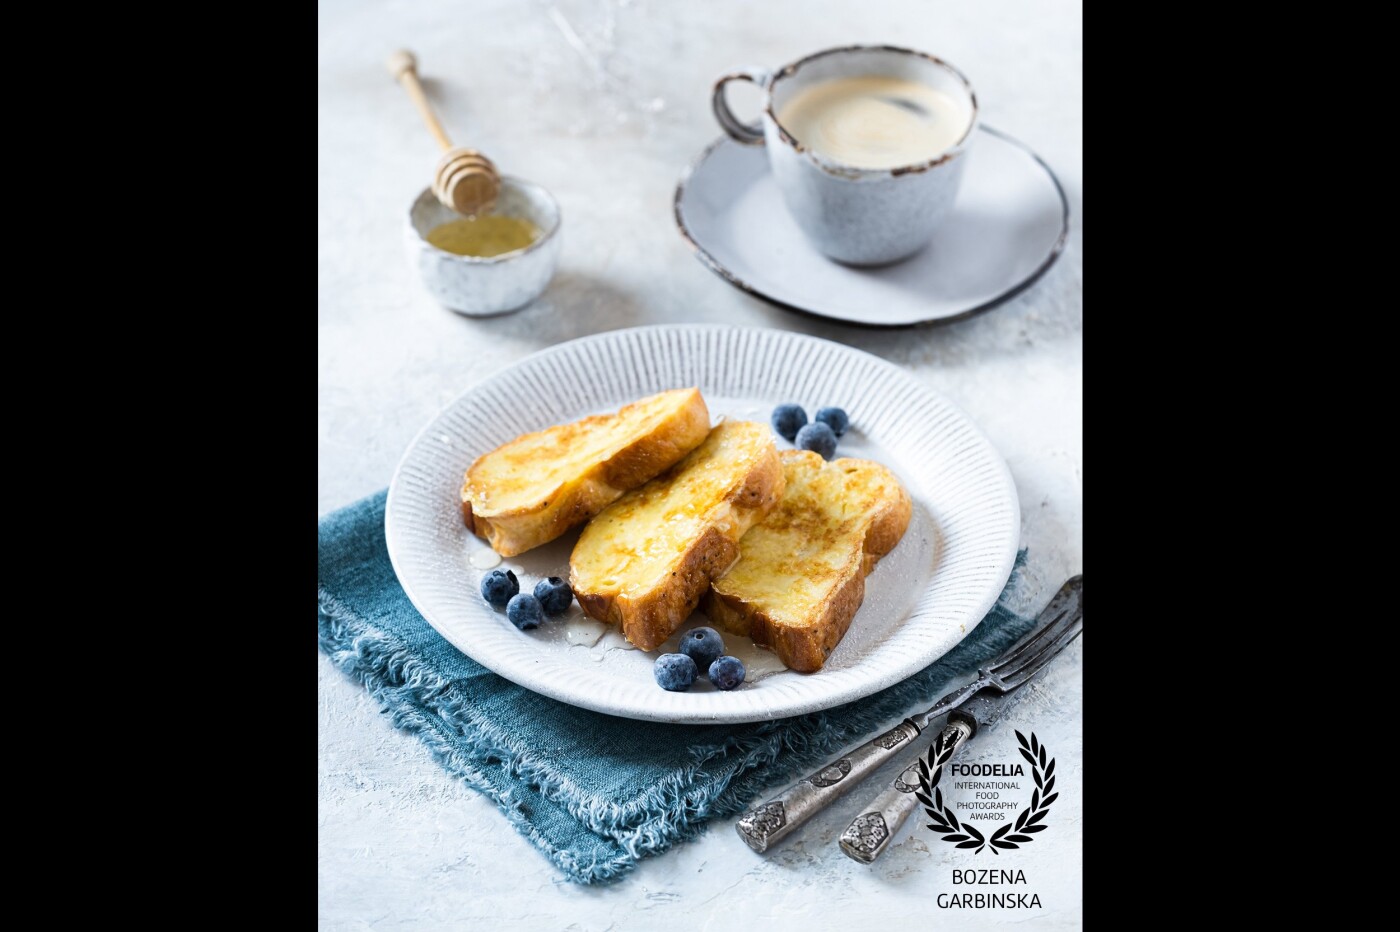 French toast with honey and blueberries it's an ideal breakfast. <br />
Camera: Fuji X-T3<br />
Lens: Fujinon 80 mm<br />
Settings: ISO 80, 1/8 s, f/4.0<br />
Shot using natural light.